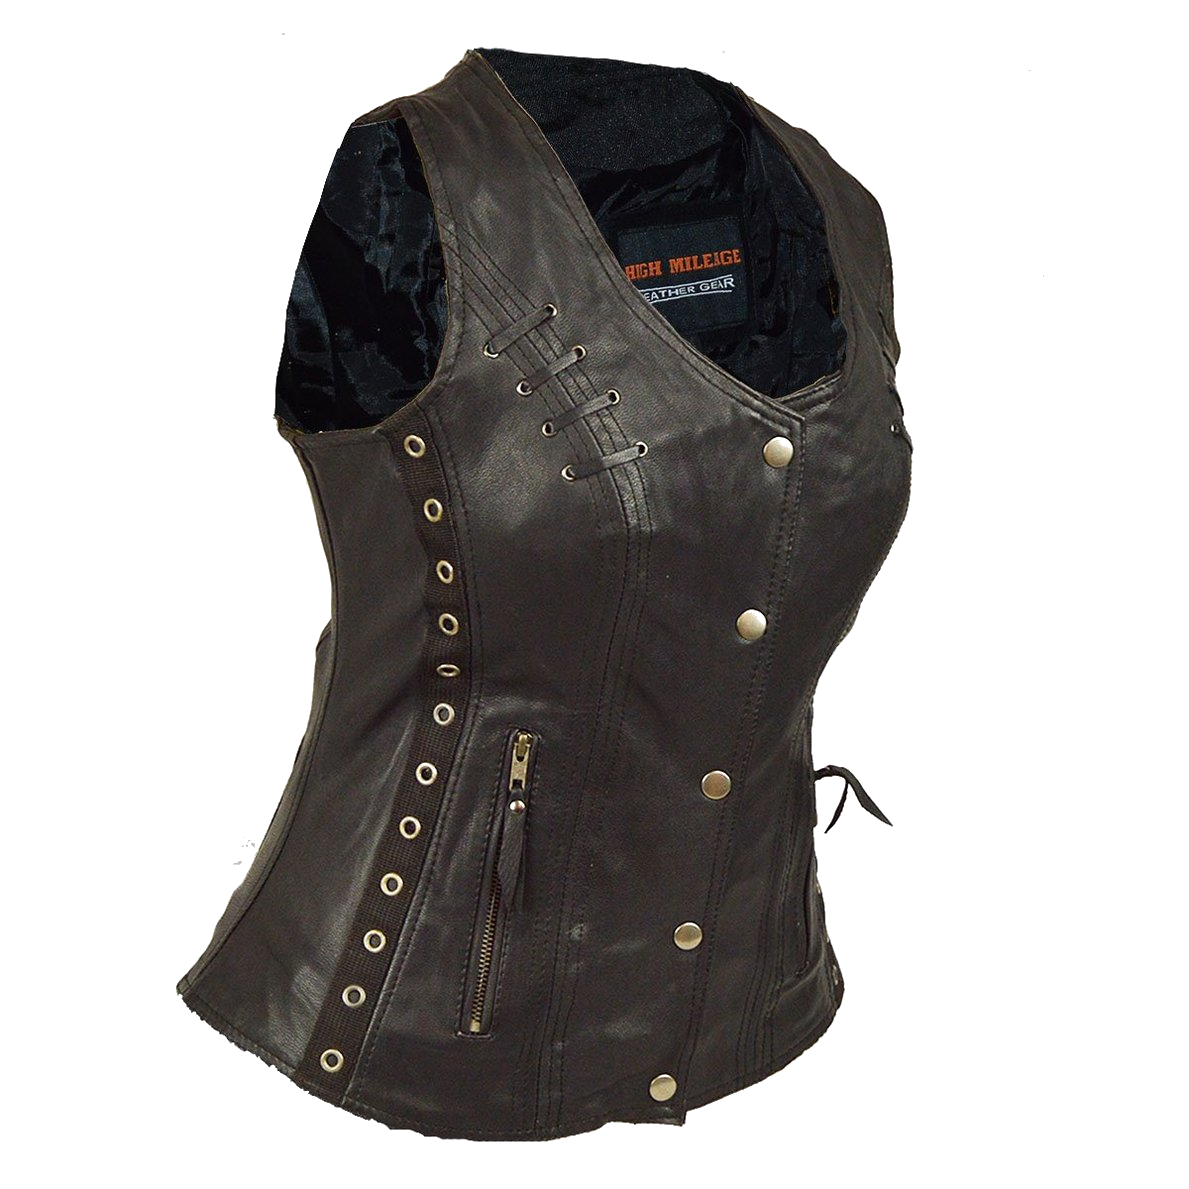 HML1038B Lightweight Goatskin Vest with Grommets, Twill and Lace Highlights